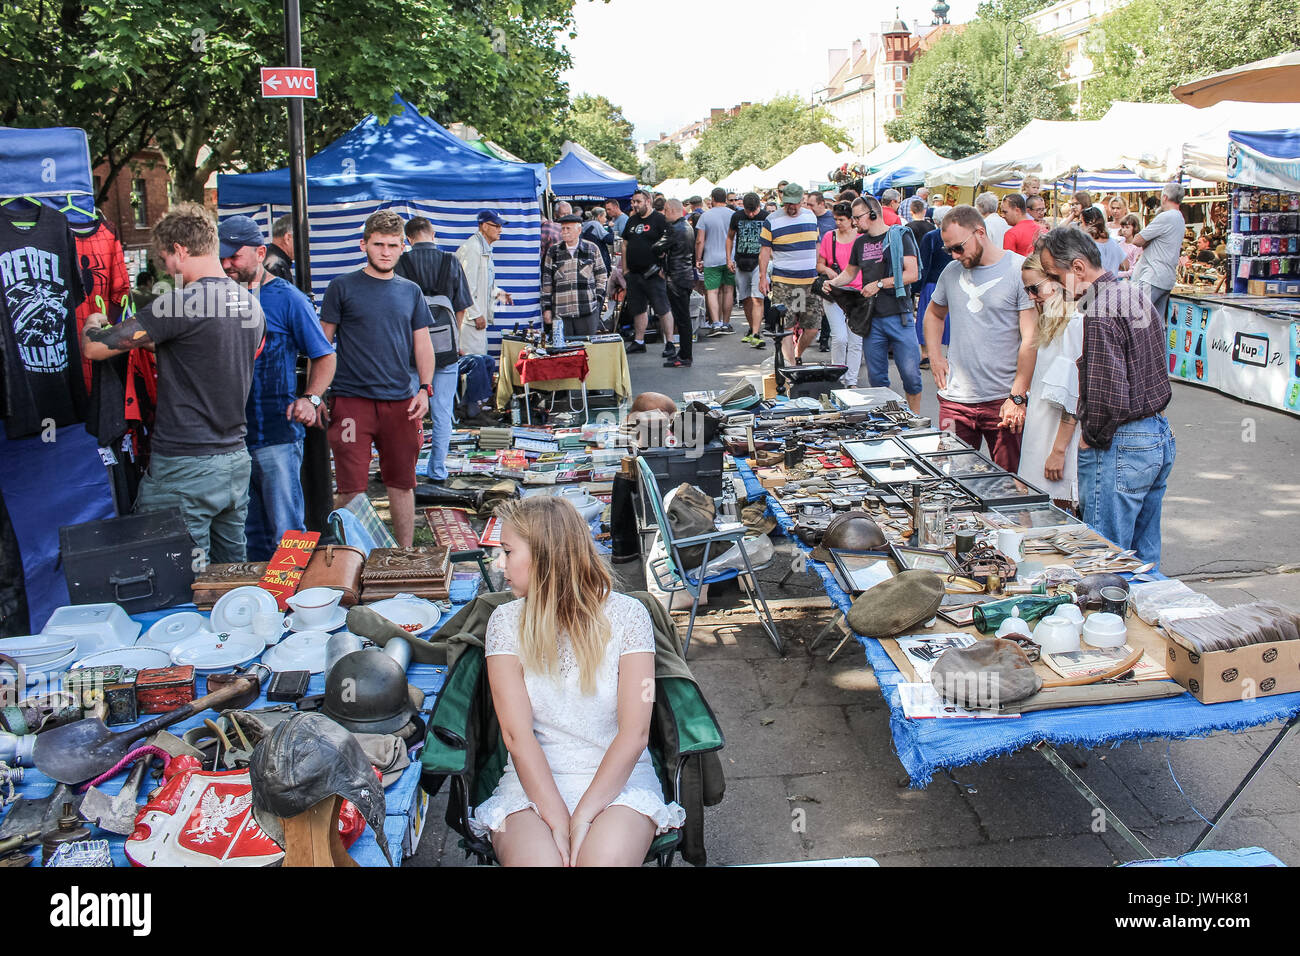 Gdansk, Poland. 13th August, 2017. People looking for goods at a flea market during 757th edition of St. Dominic’s Fair are seen in Gdansk, Poland on 13 August 2017  More than one thousand 1000 traders, artists and collectors participate in the Fair occupying with their stands several streets in the centre of the in the historical city centre. St. Dominic’s Fair is the largest open-air trade and cultural event in Poland and one of the largest such events in Europe. It has enjoyed over seven hundred fifty years of tradition; it was established by the Pope Alexander IV in 1260. Stock Photo